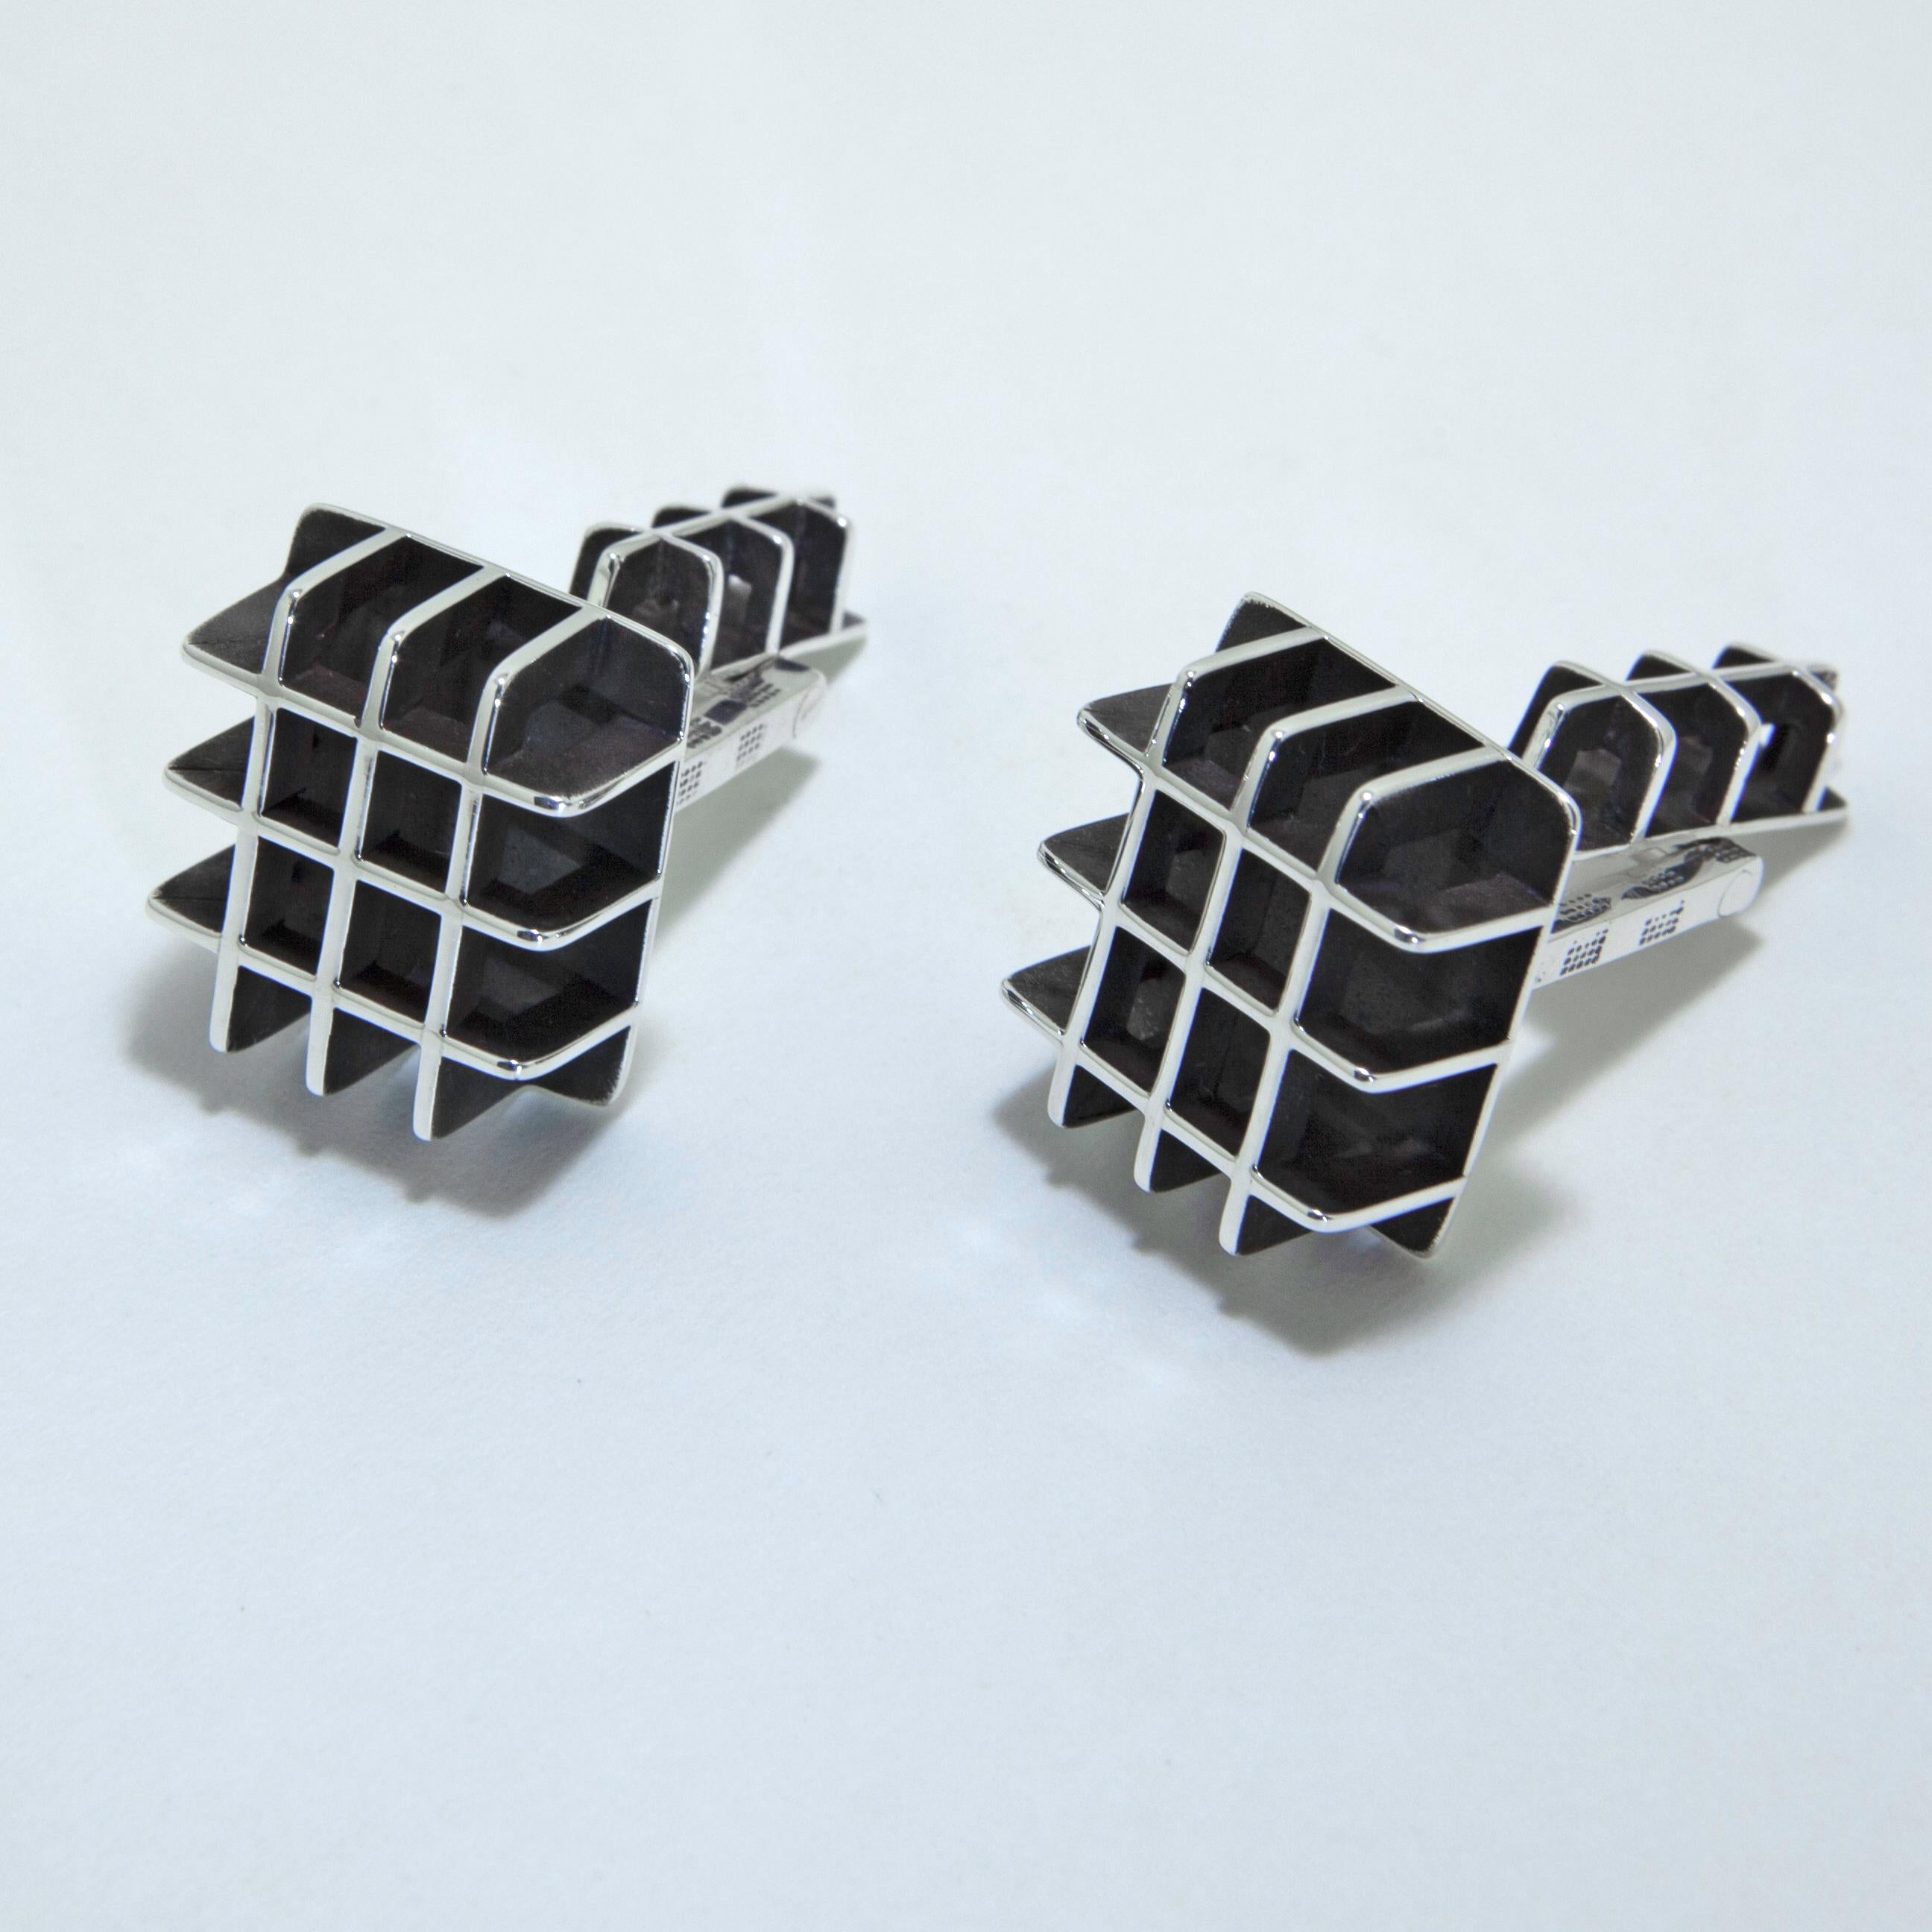 Architecture and Engineering coalesce in these elegant one of a kind Sterling Silver cufflinks.  Fabricated by hand;  I incorporated the Halved/Cross Lap joinery method for the intersecting points to create the open grid structure.  Elevated with a